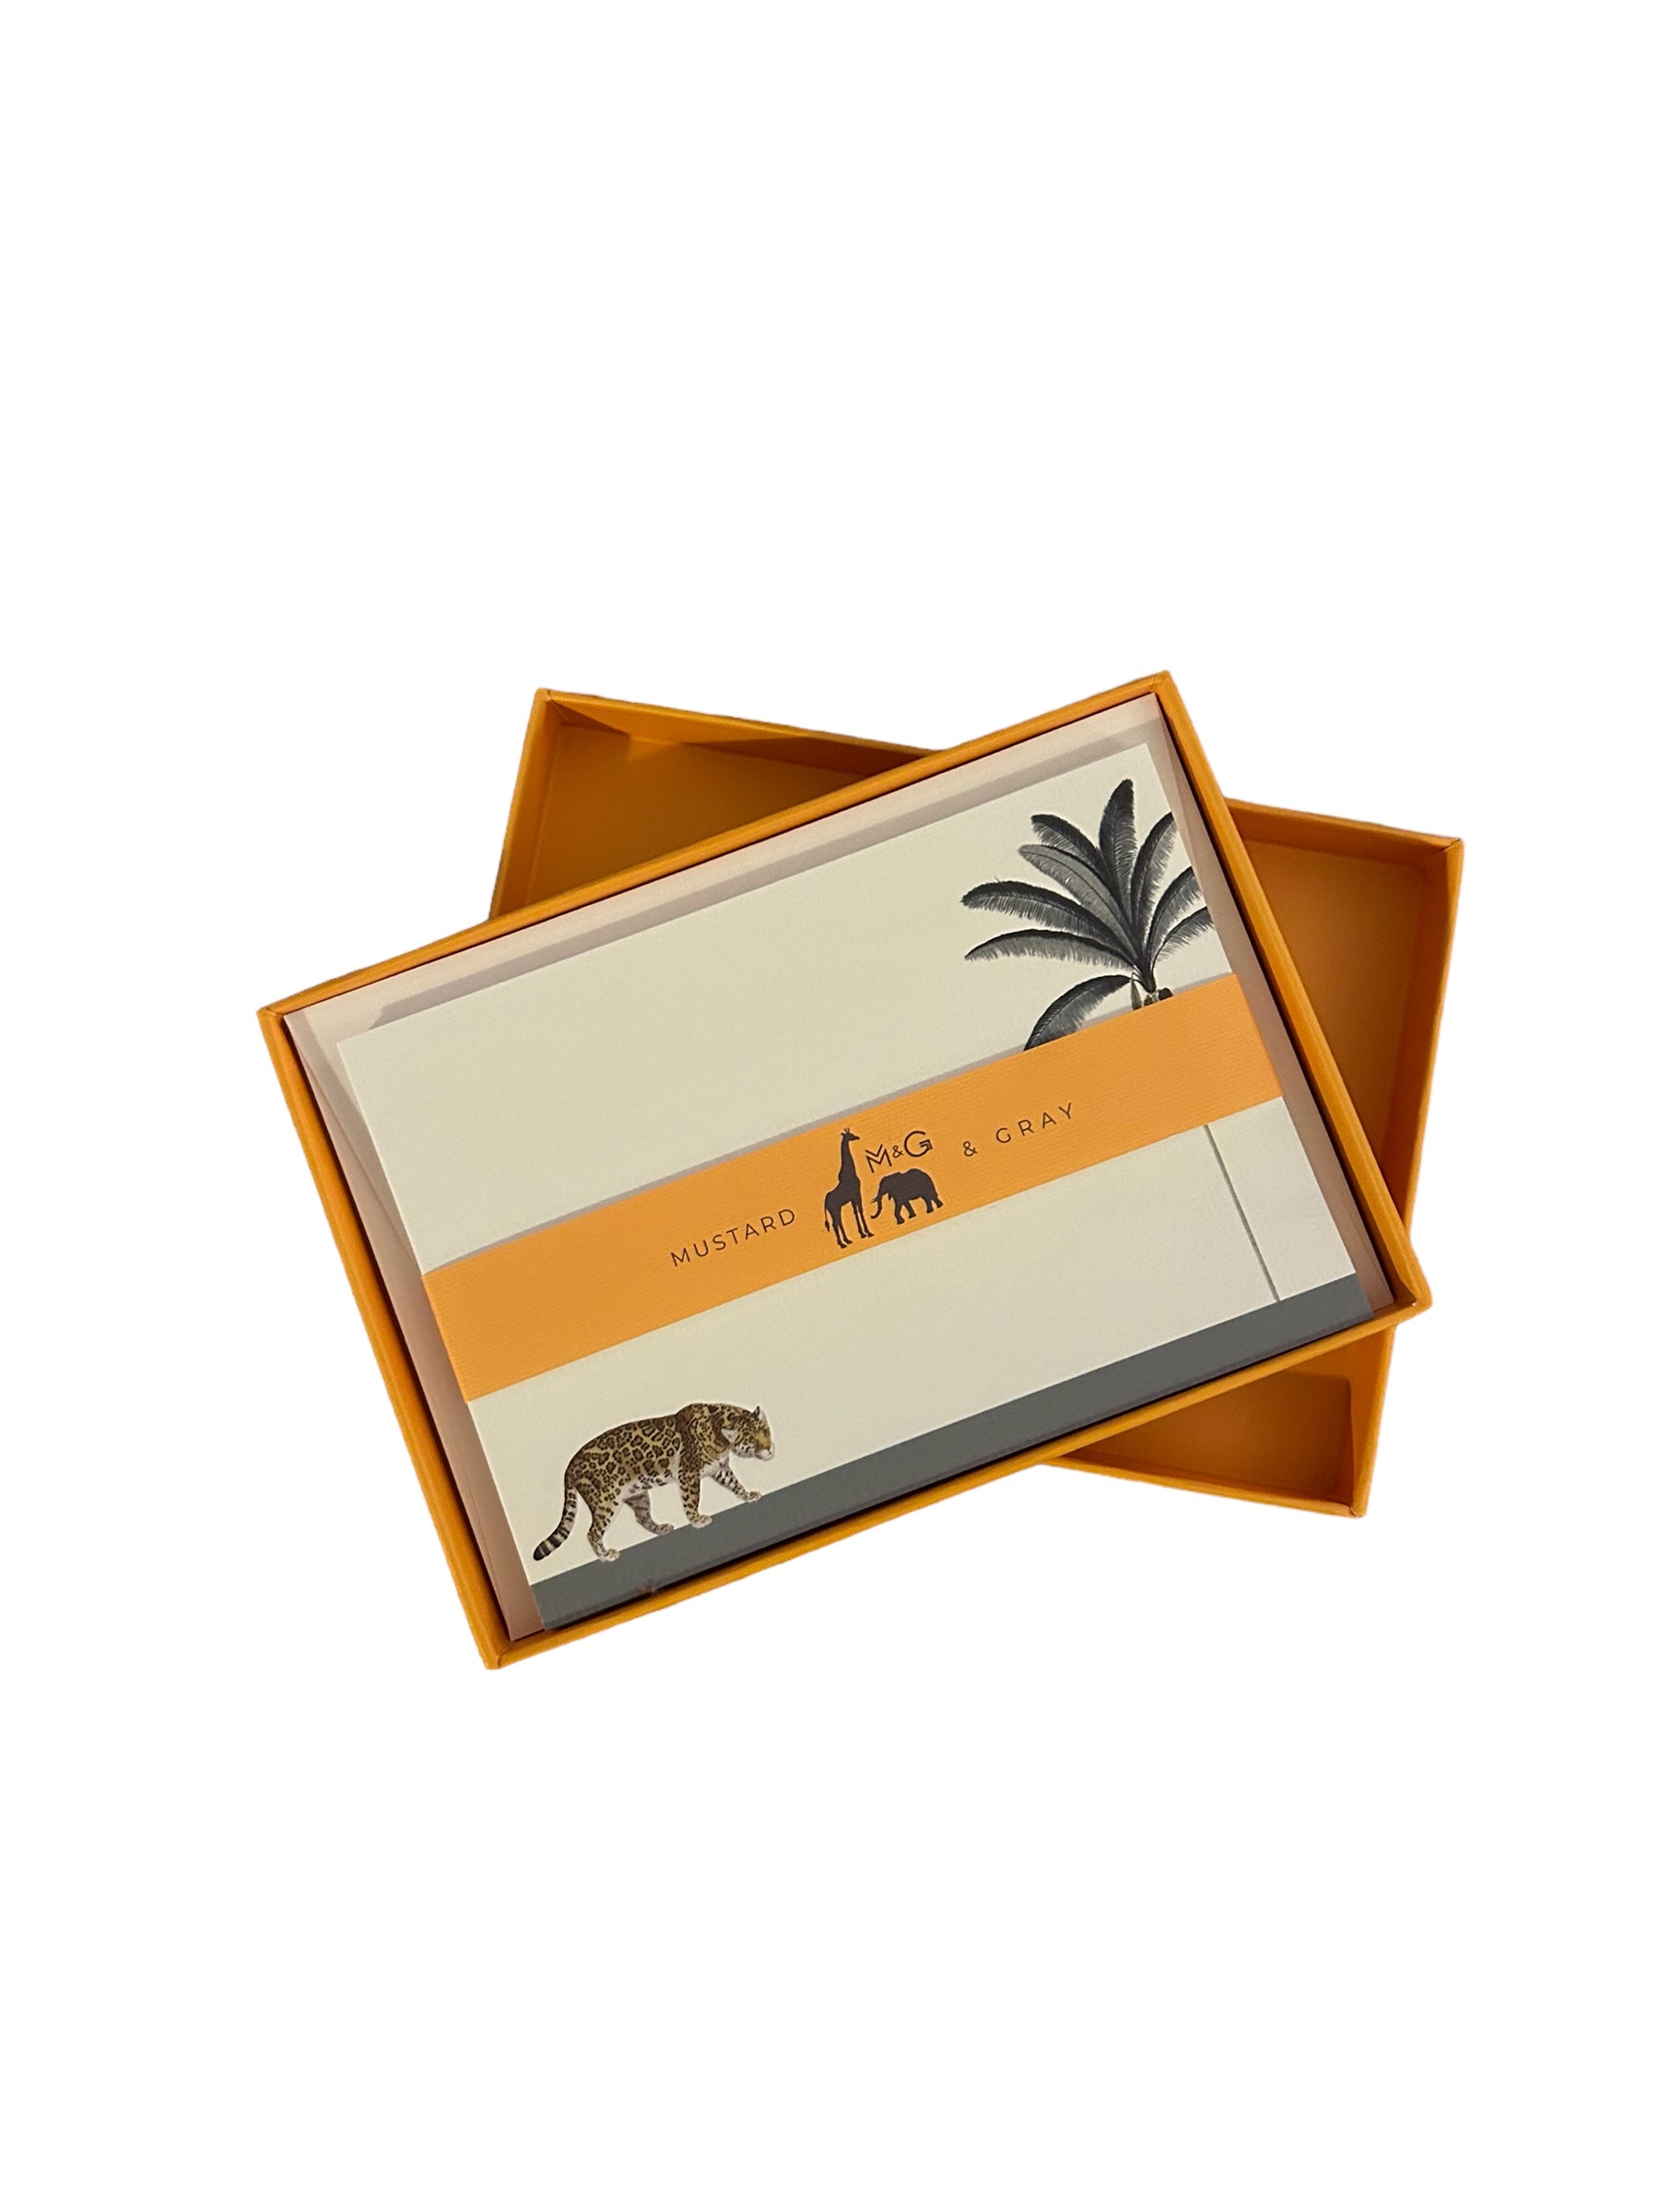 Darwin's Menagerie "Prowling Leopard" Notecard Set with Laid Envelopes